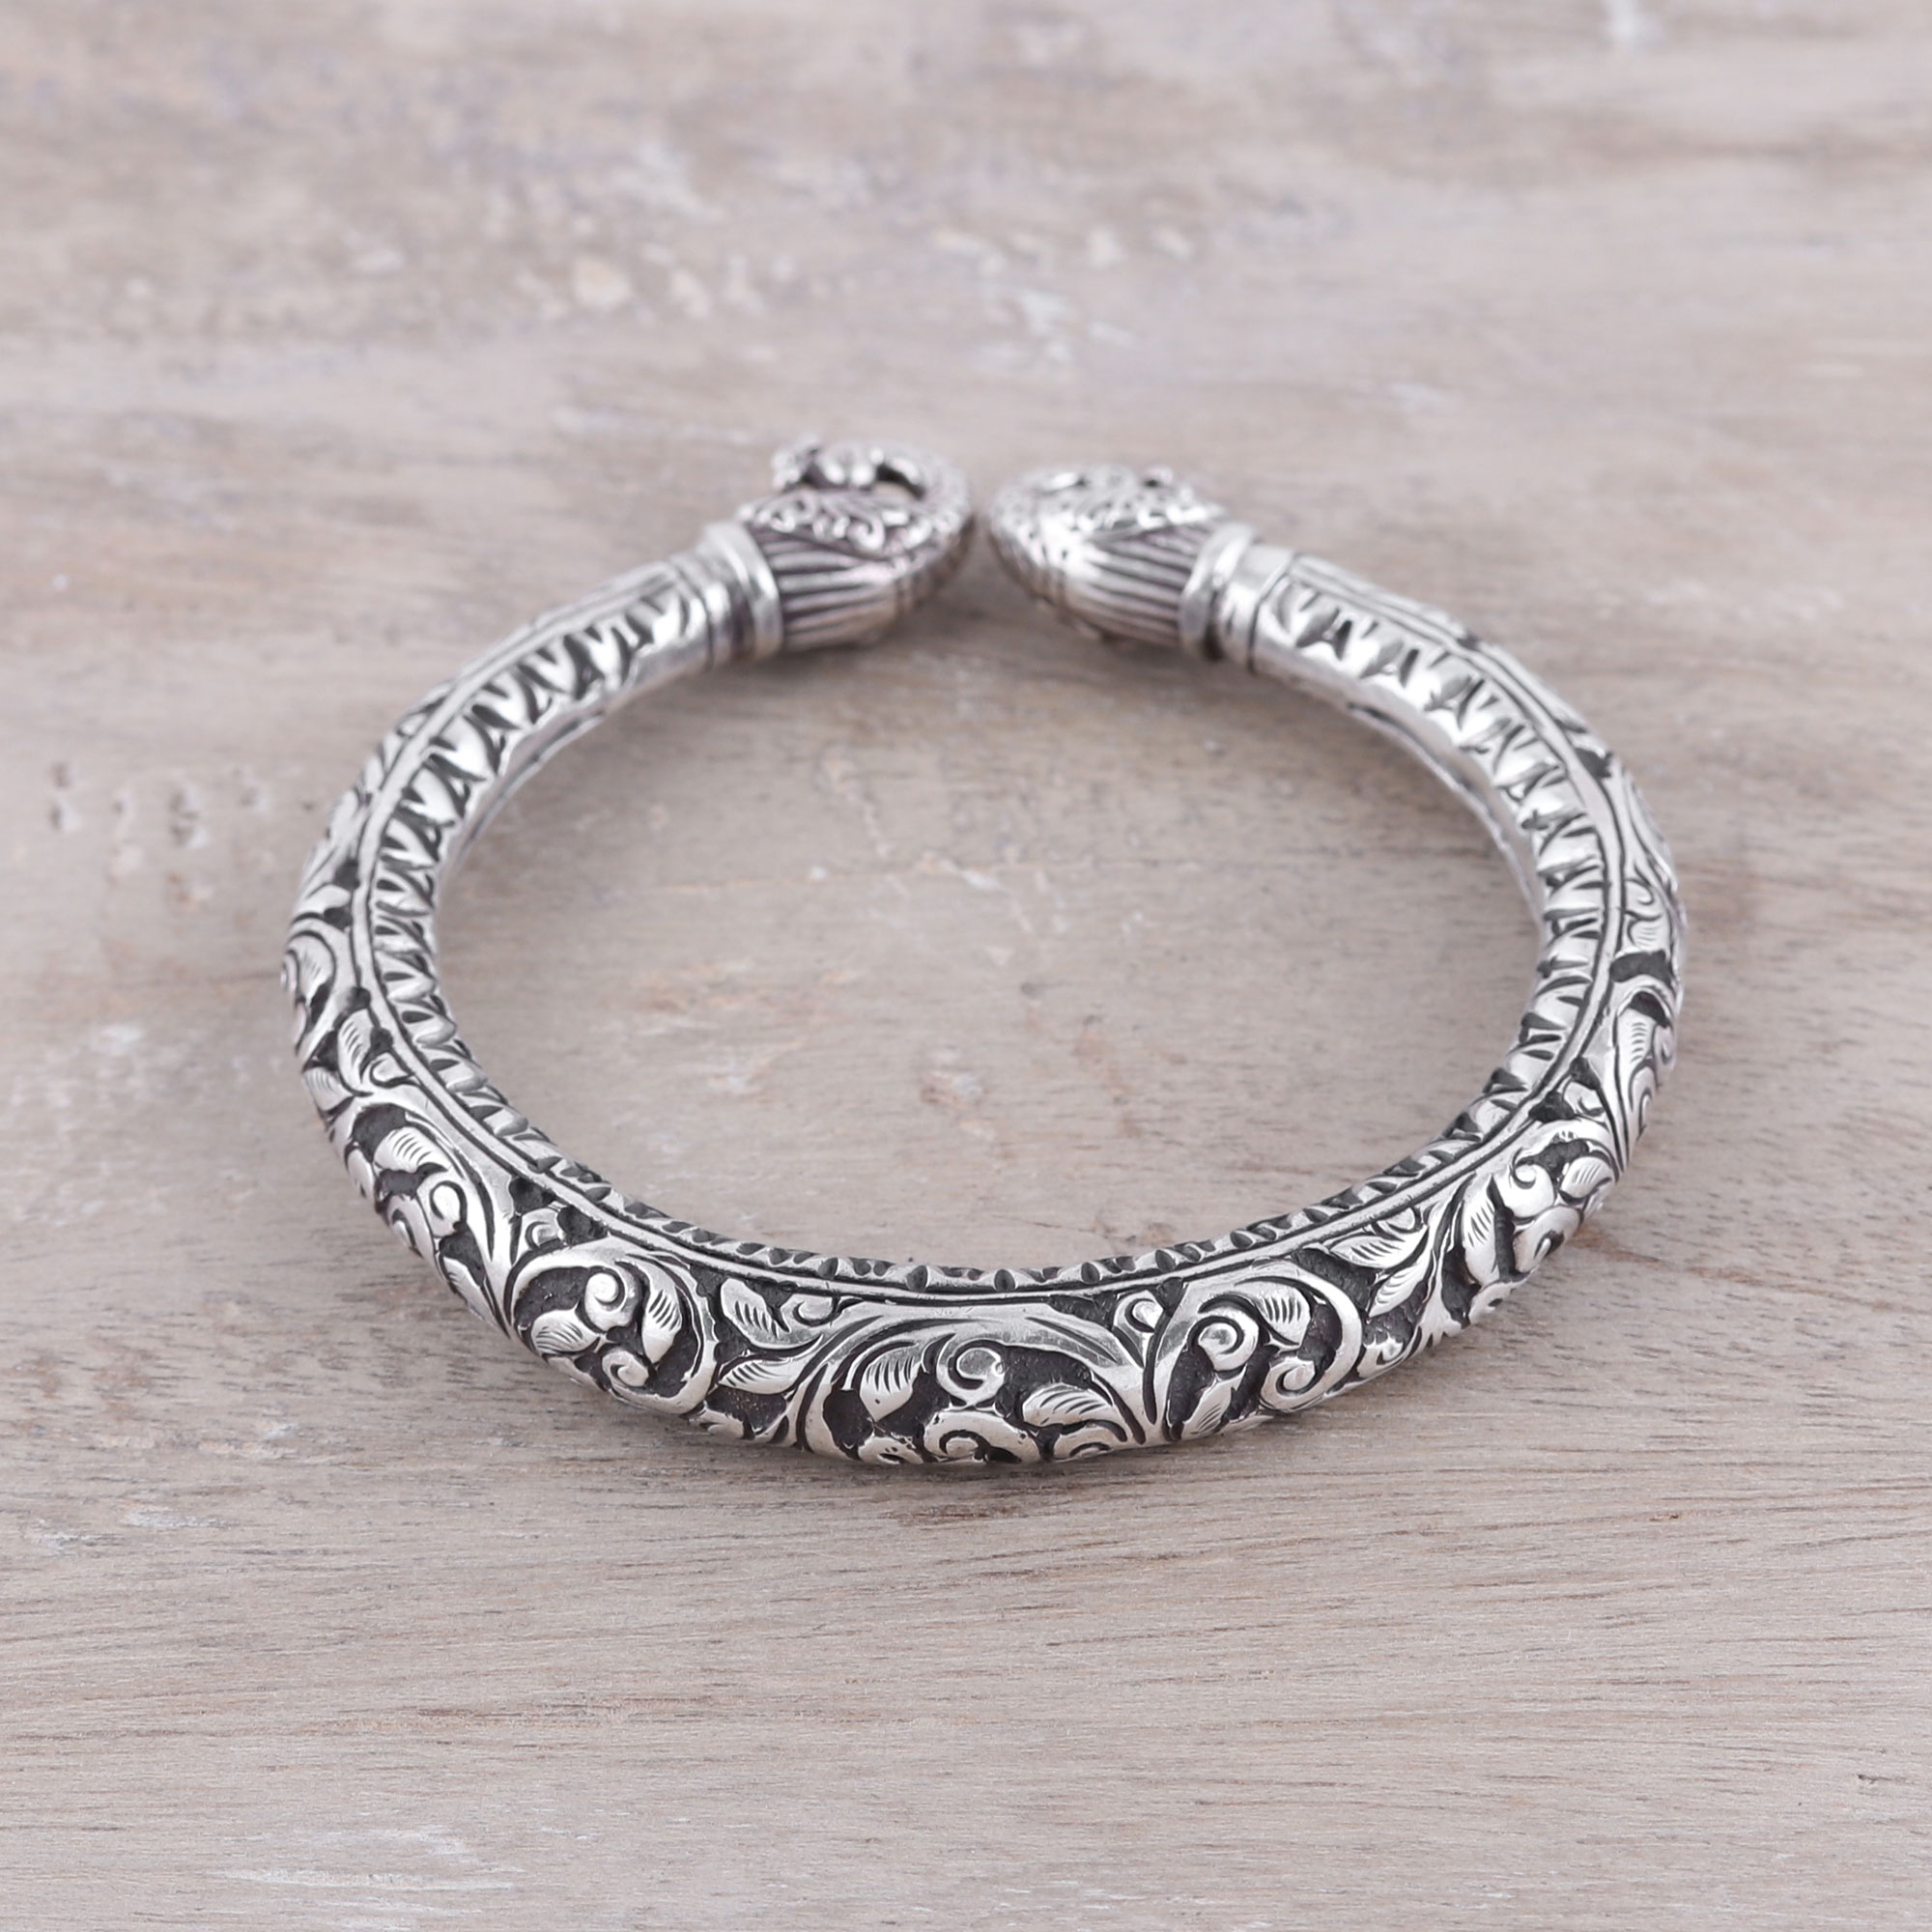 Sterling Silver Cuff Bracelet with Peacock Motif - Peacock's Bower | NOVICA